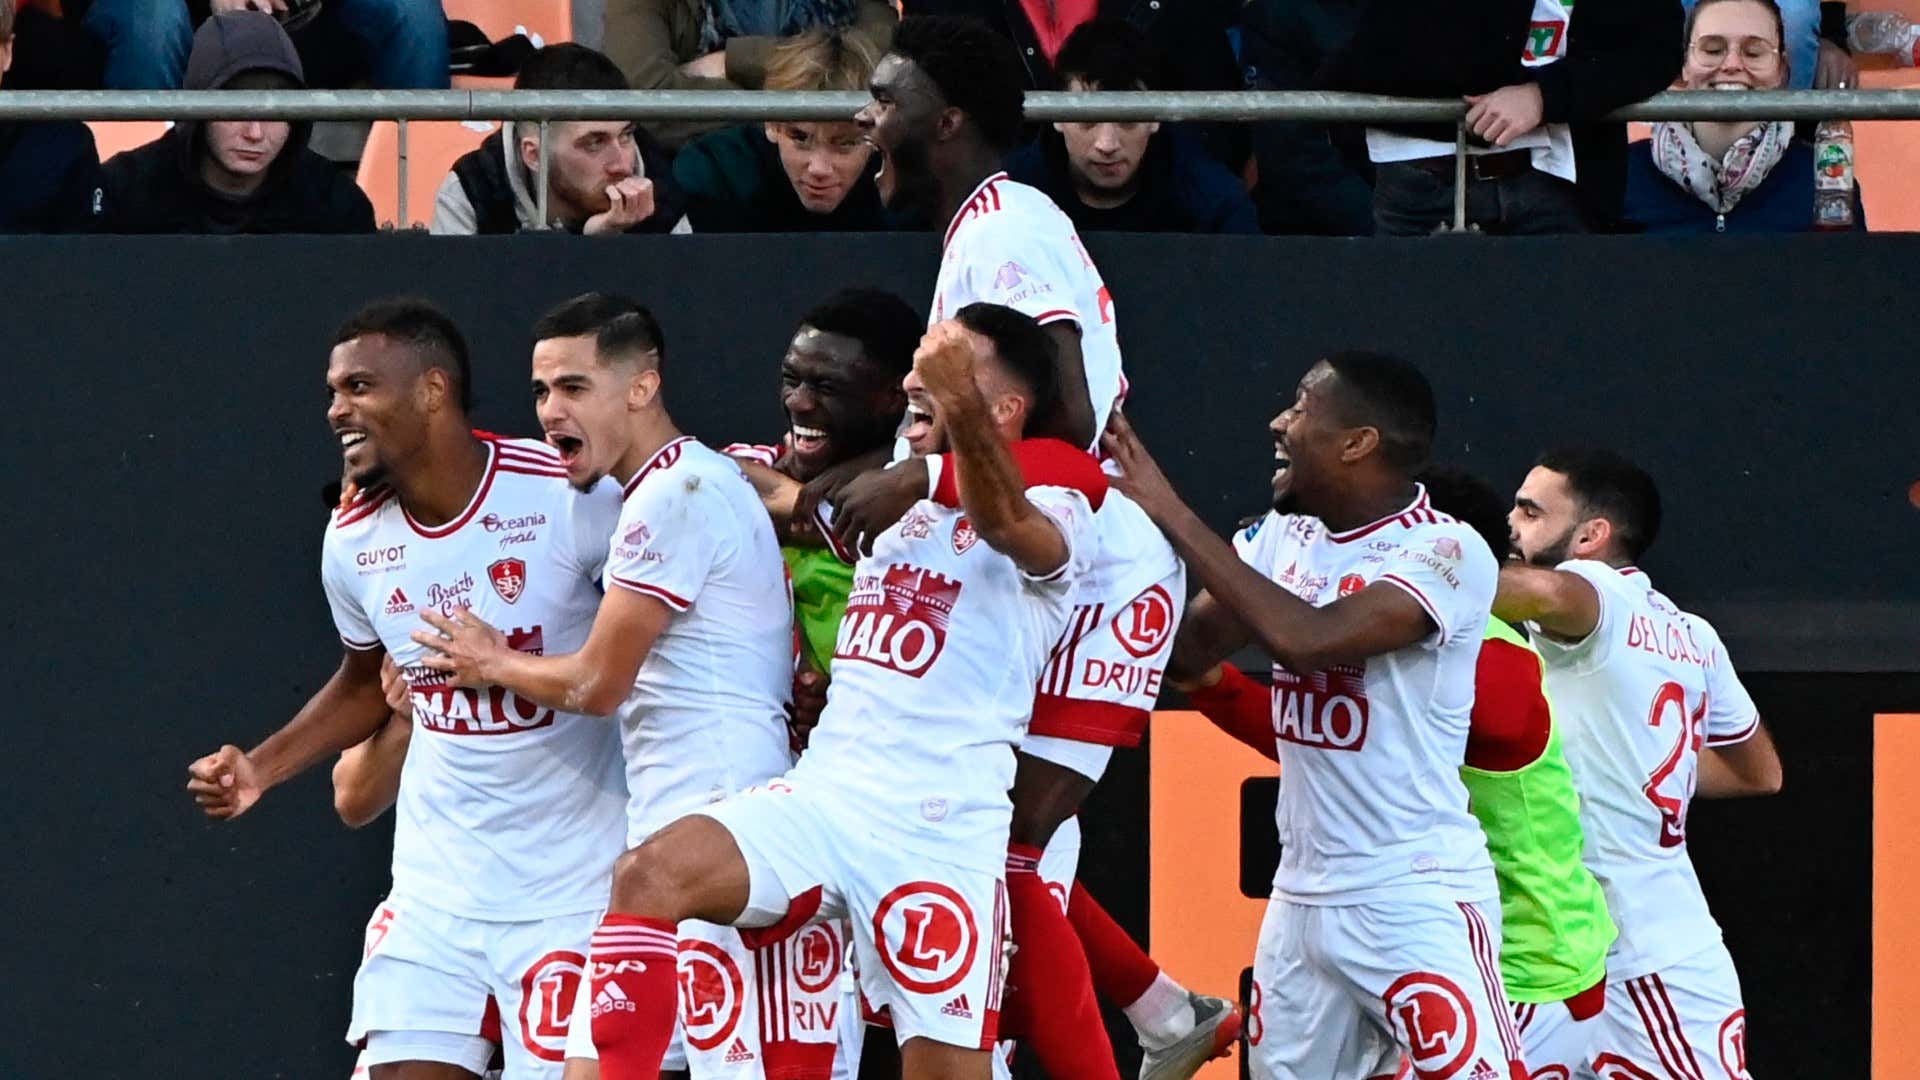 Ligue 1 Wrap: Mounie & Bayo lead African goal scorers, Ajorque sees red